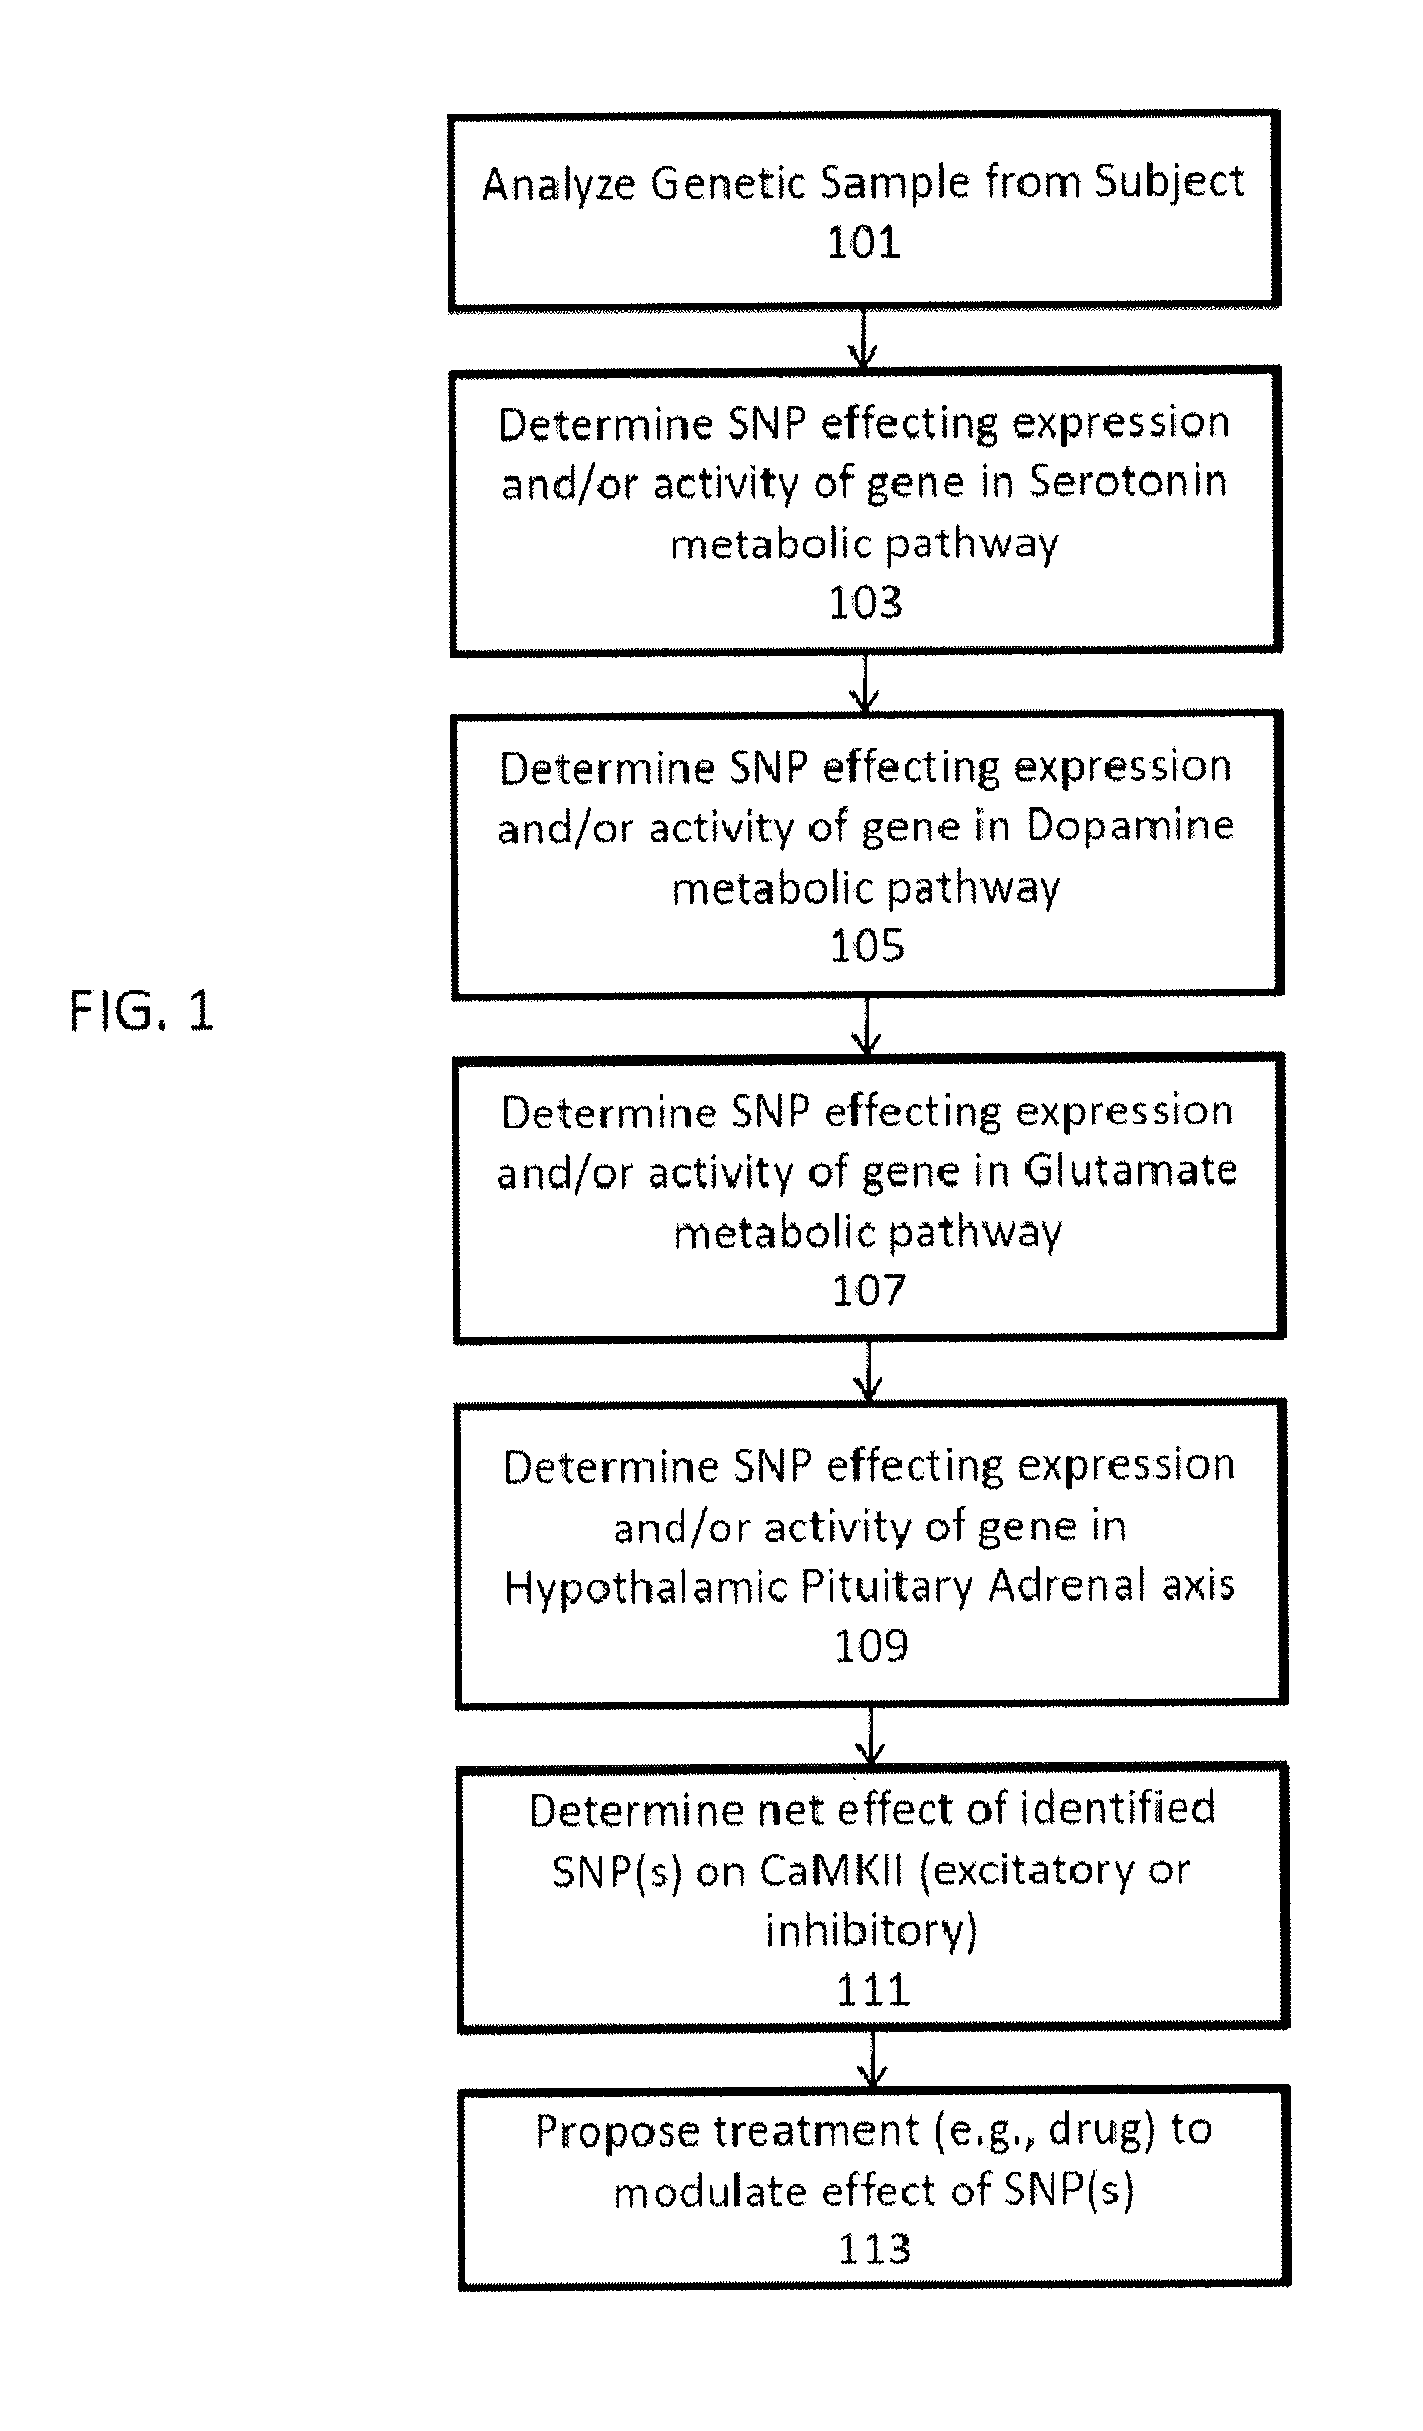 Methods for assessment and treatment of mood disorders via single nucleotide polymorphisms analysis